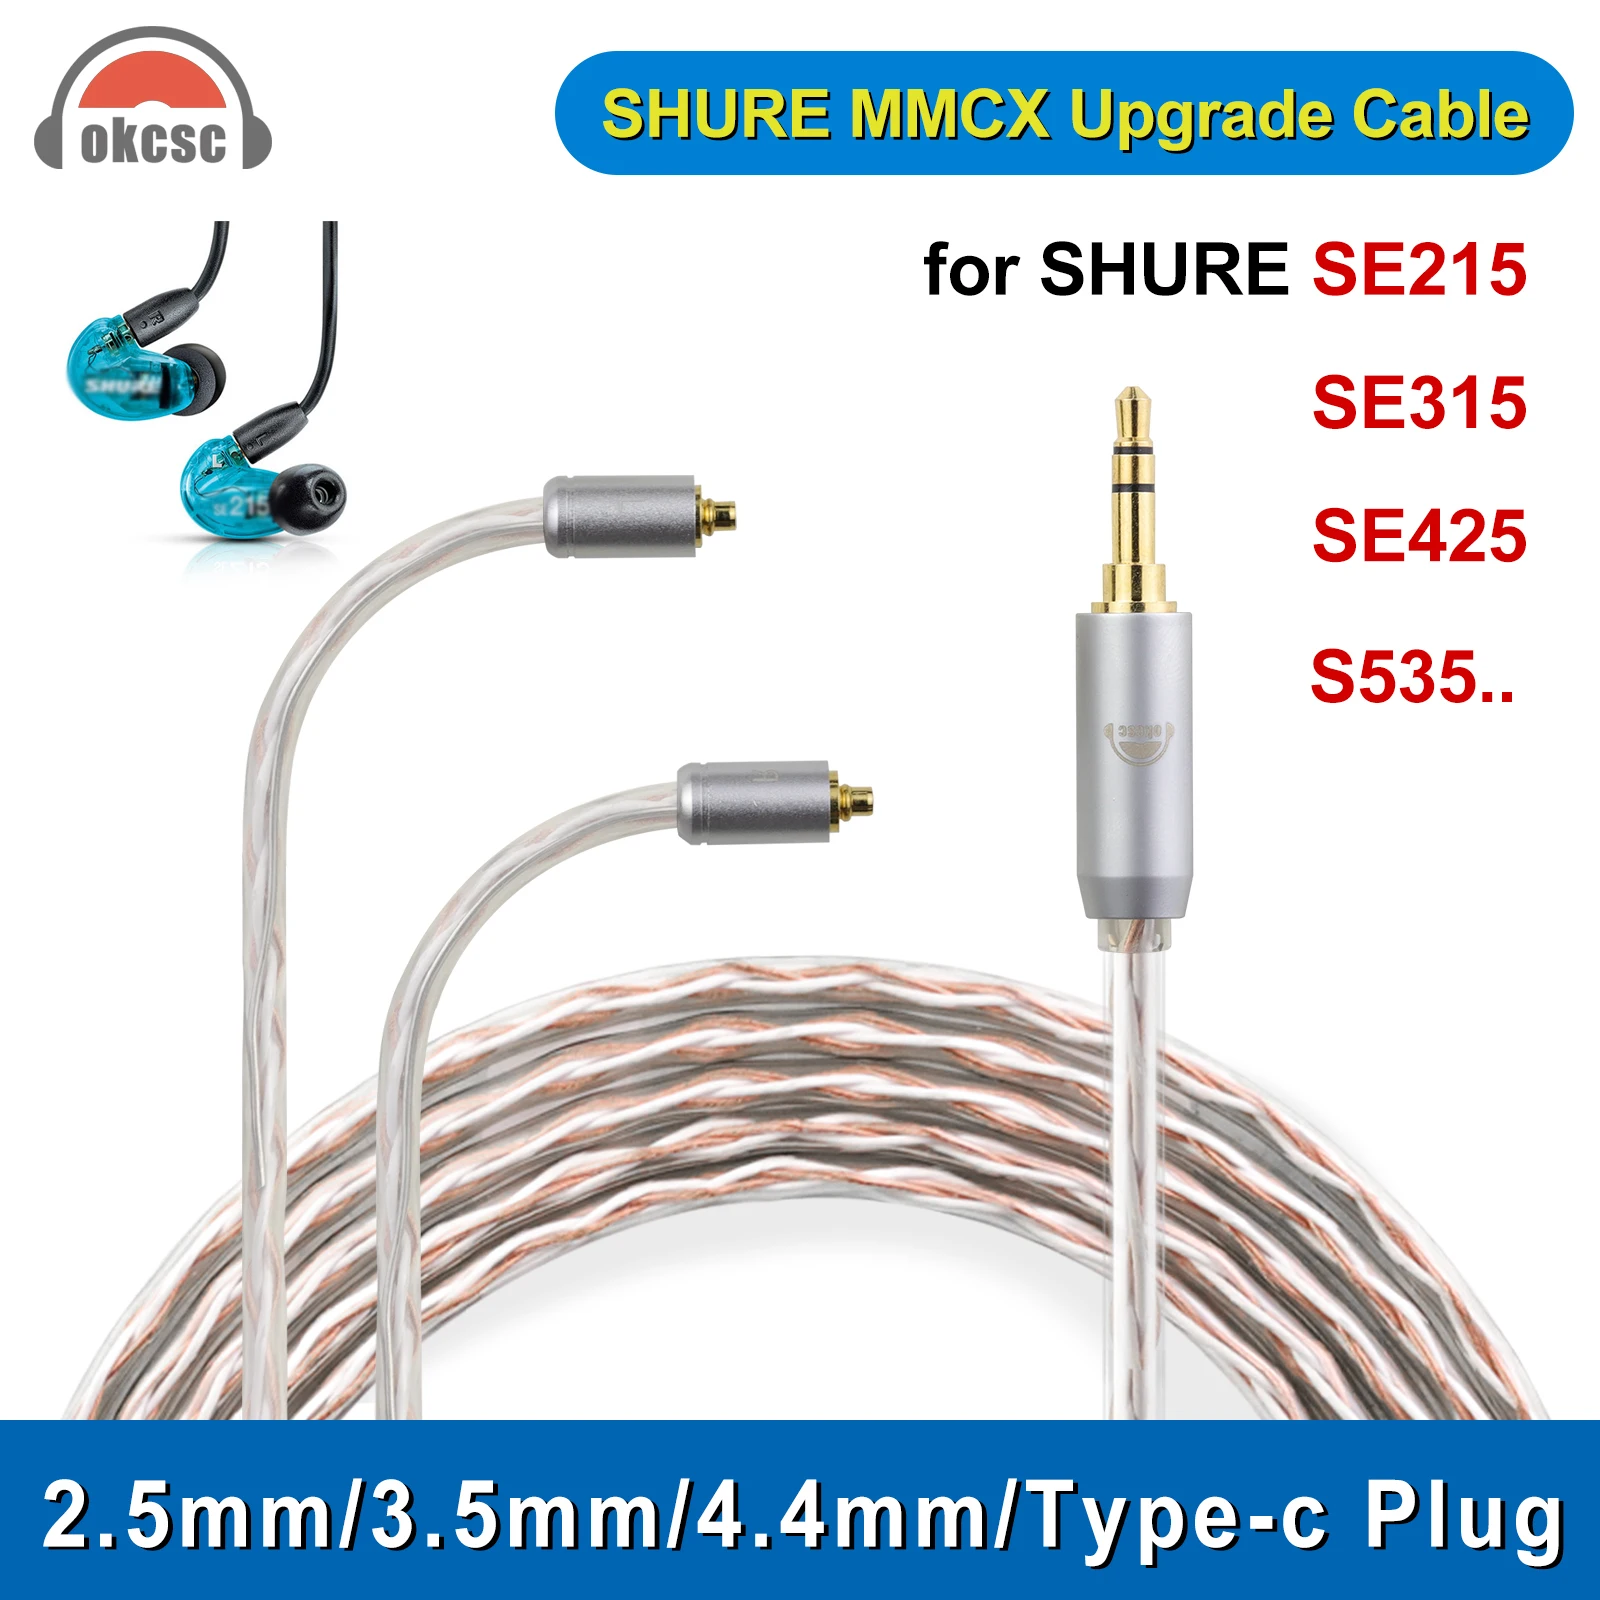 

OKCSC Earphone Cable for SHURE SE215 SE315 SE425 S535 2.5mm 3.5mm 4.4mm Type-c Plug Upgraded Silver Plated HiFi Audio Cable